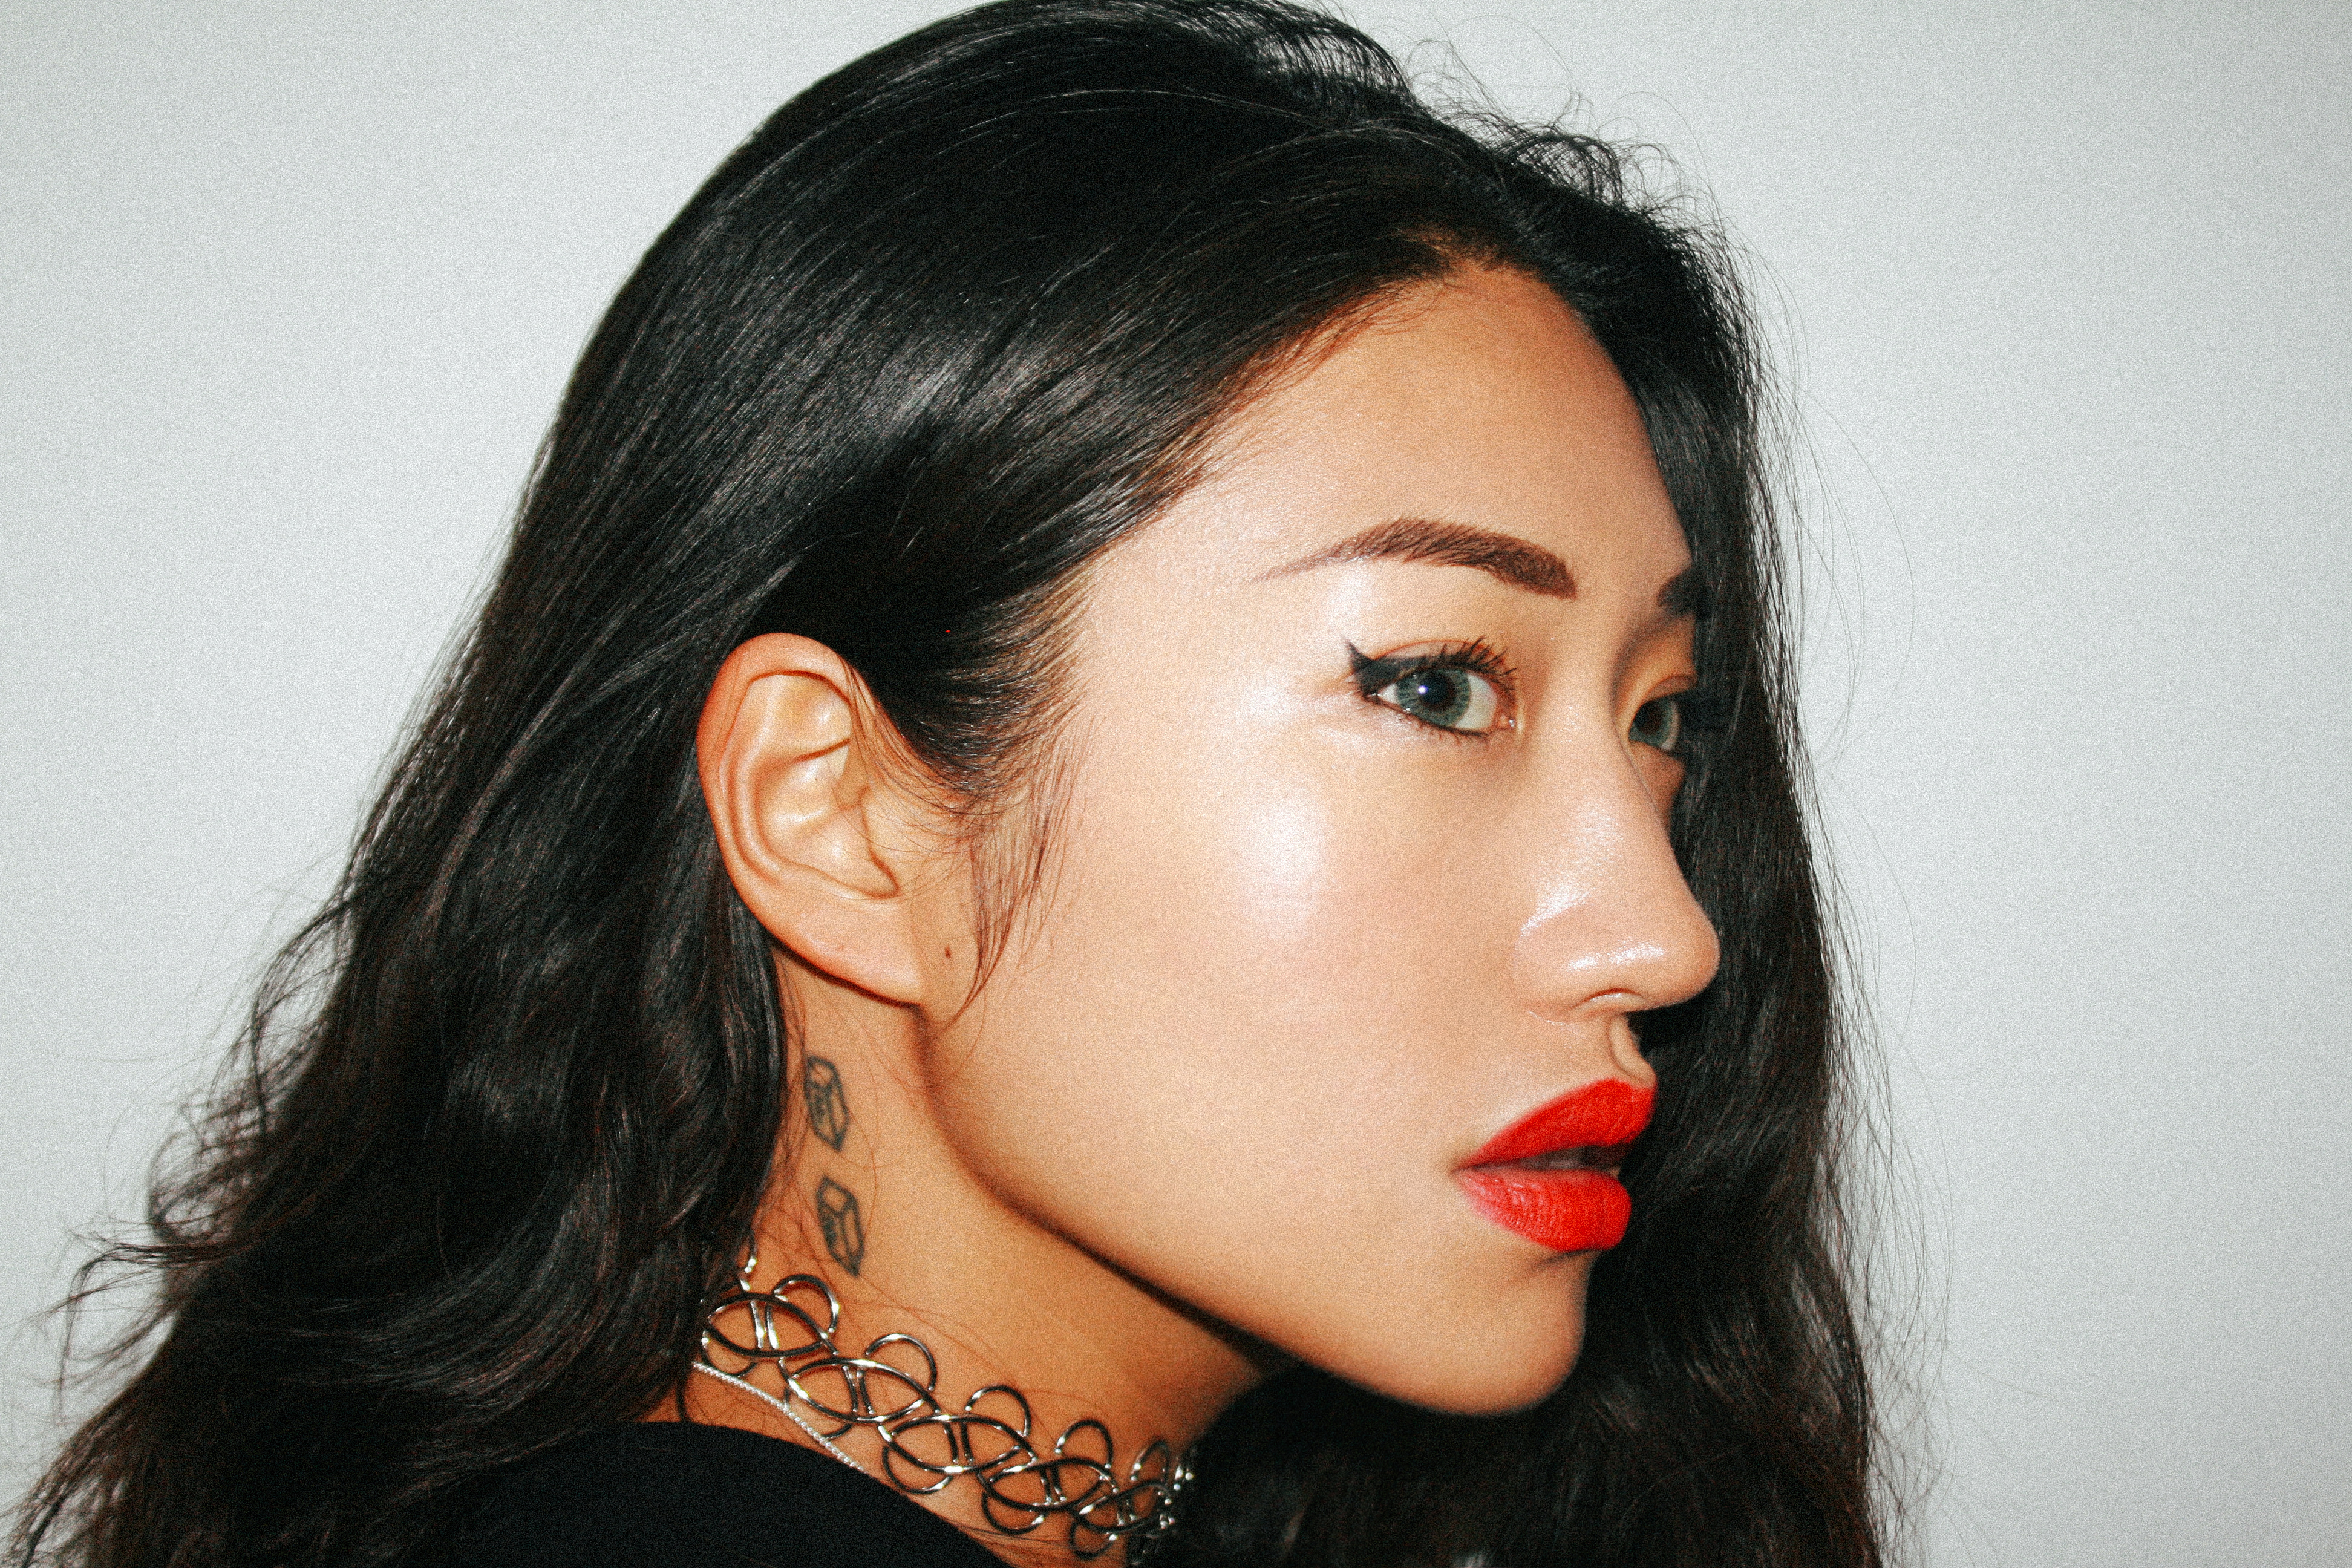 METCHA  6 things you need to know about Peggy Gou